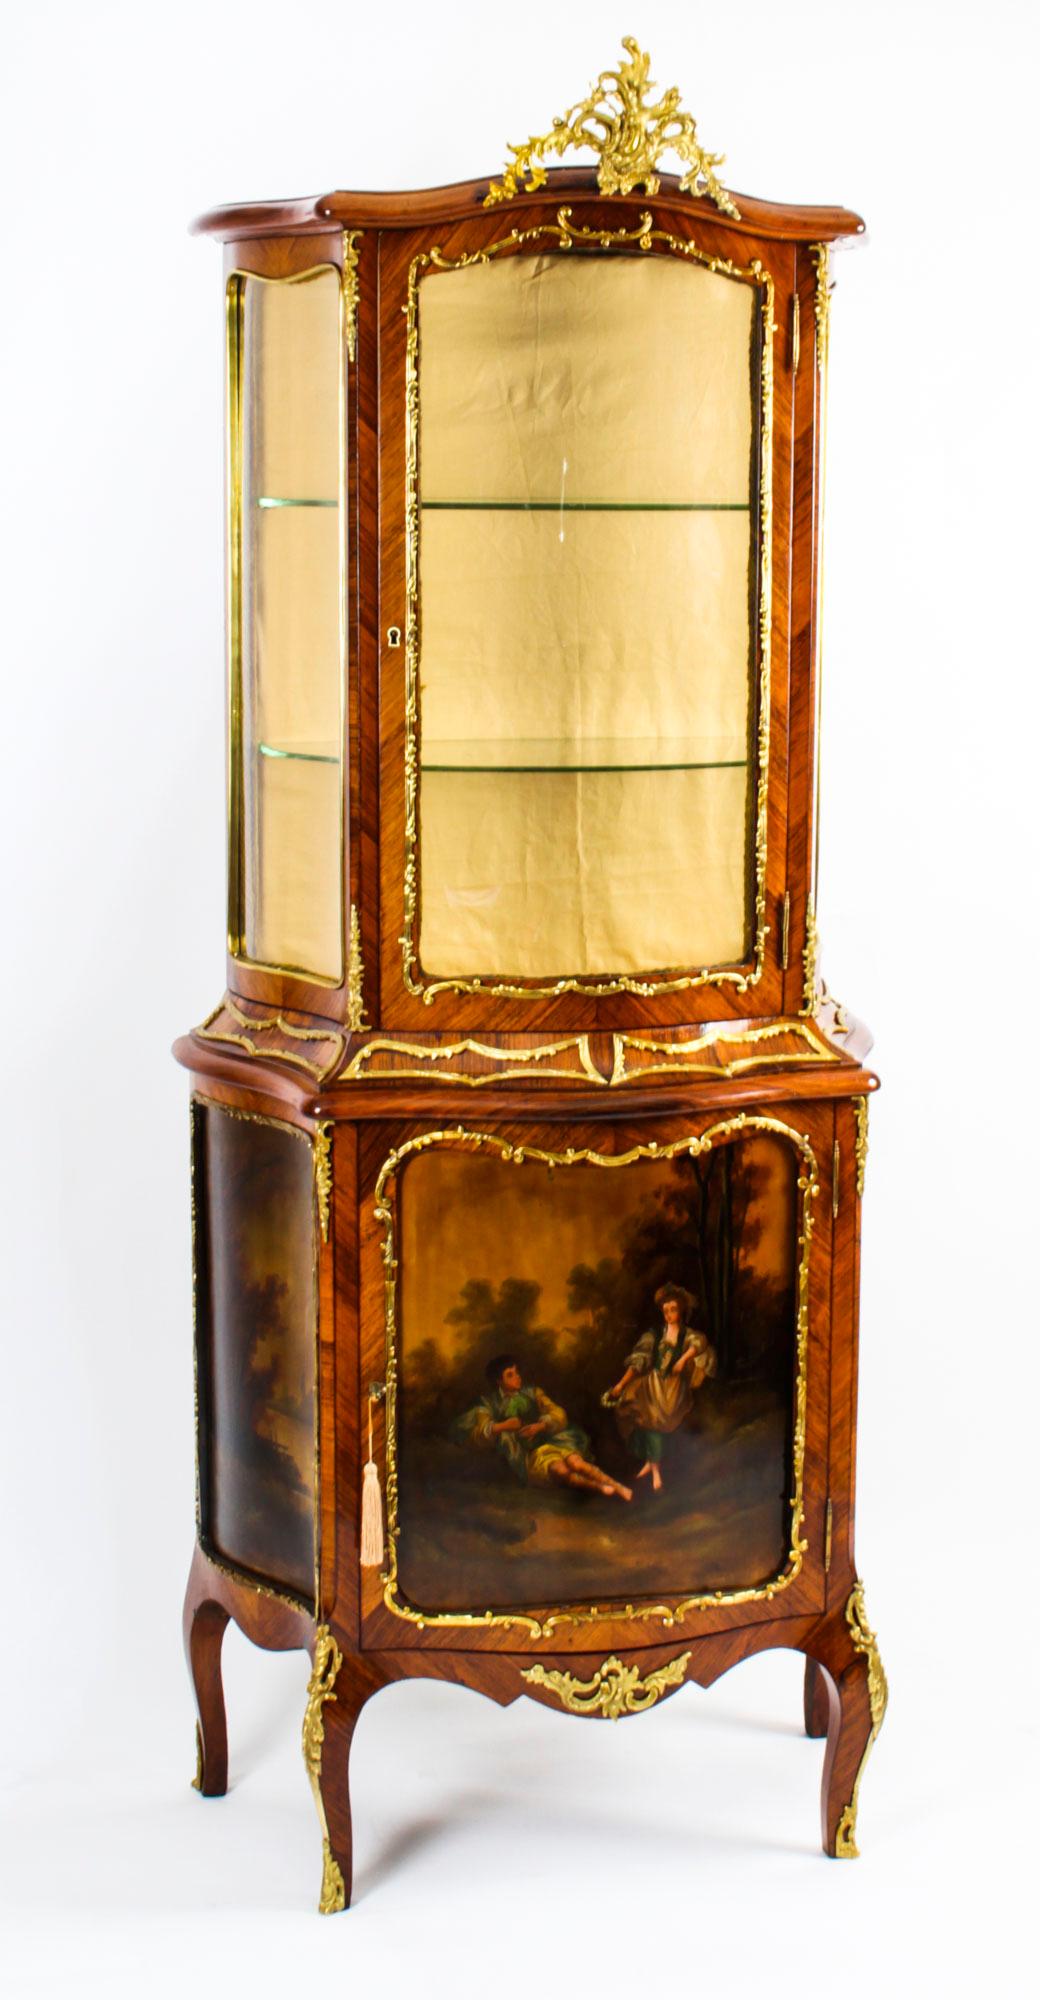 This is a stunning antique French Vernis Martin vitrine, in the Louis XV transitional manner, circa 1880 in date, with exquisite hand painted decoration and exquisite ormolu mounts.

The top has serpentine glass sides with a central bow glazed